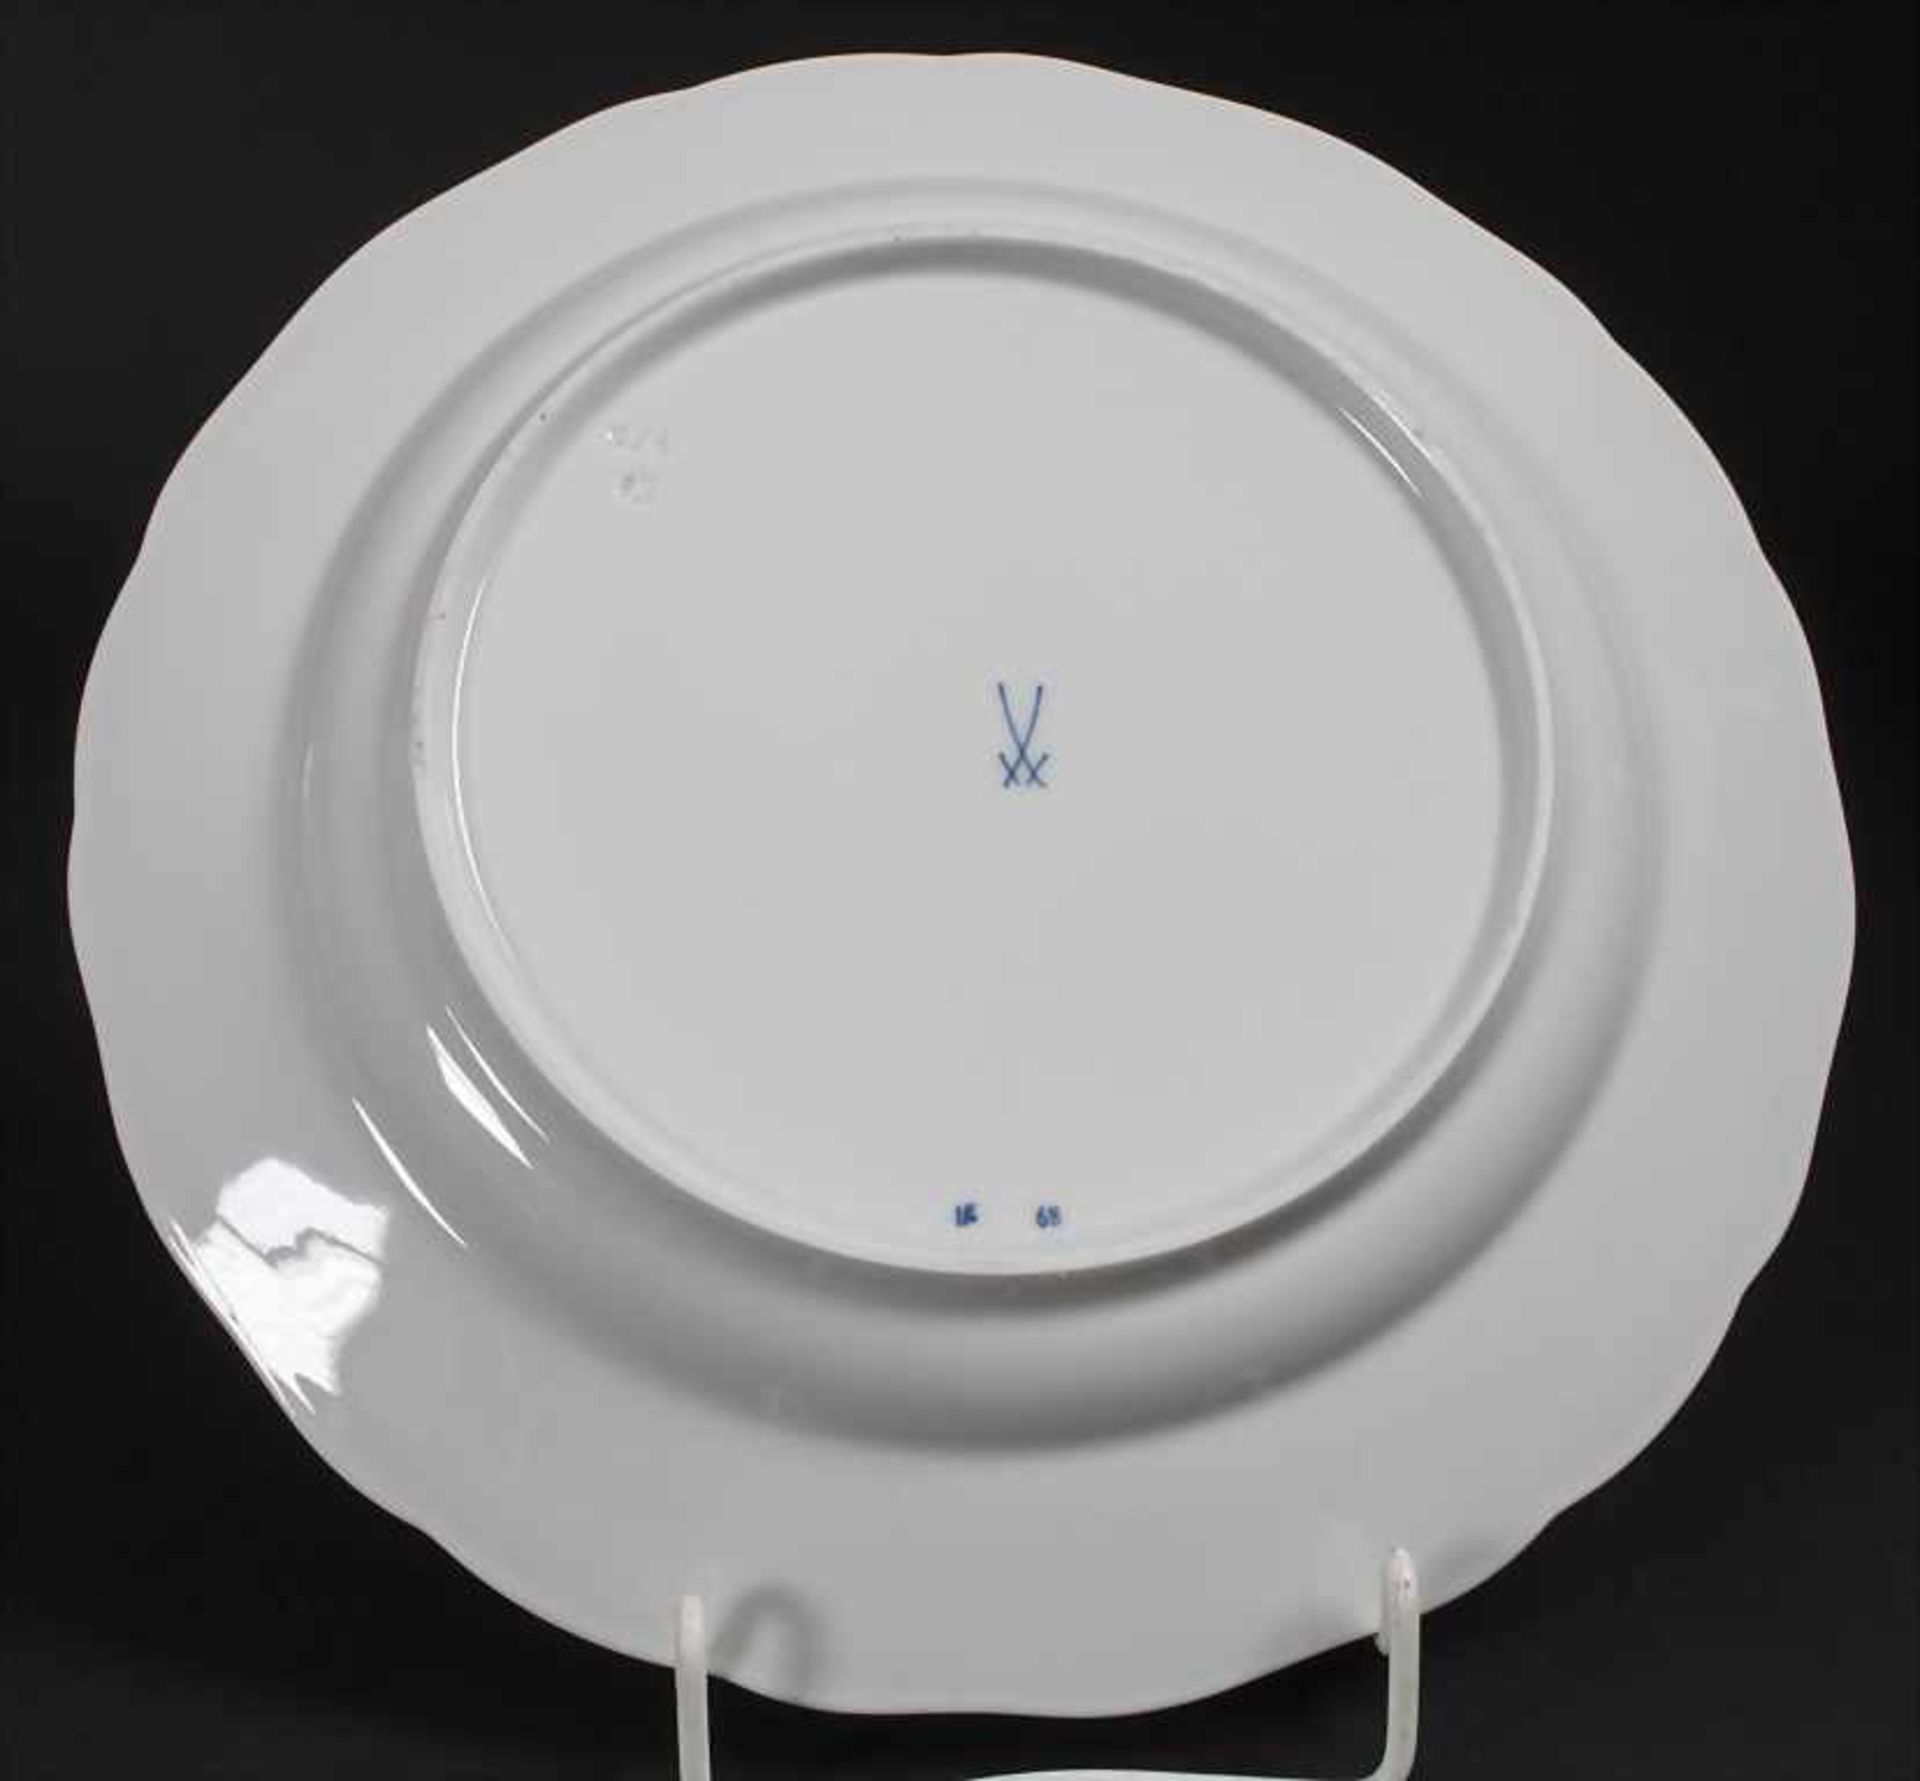 28 tlg. Service 'Zwiebelmuster' / A 28-piece dinner set with 'Onion Pattern', Meissen, 20. Jh. - Image 4 of 17